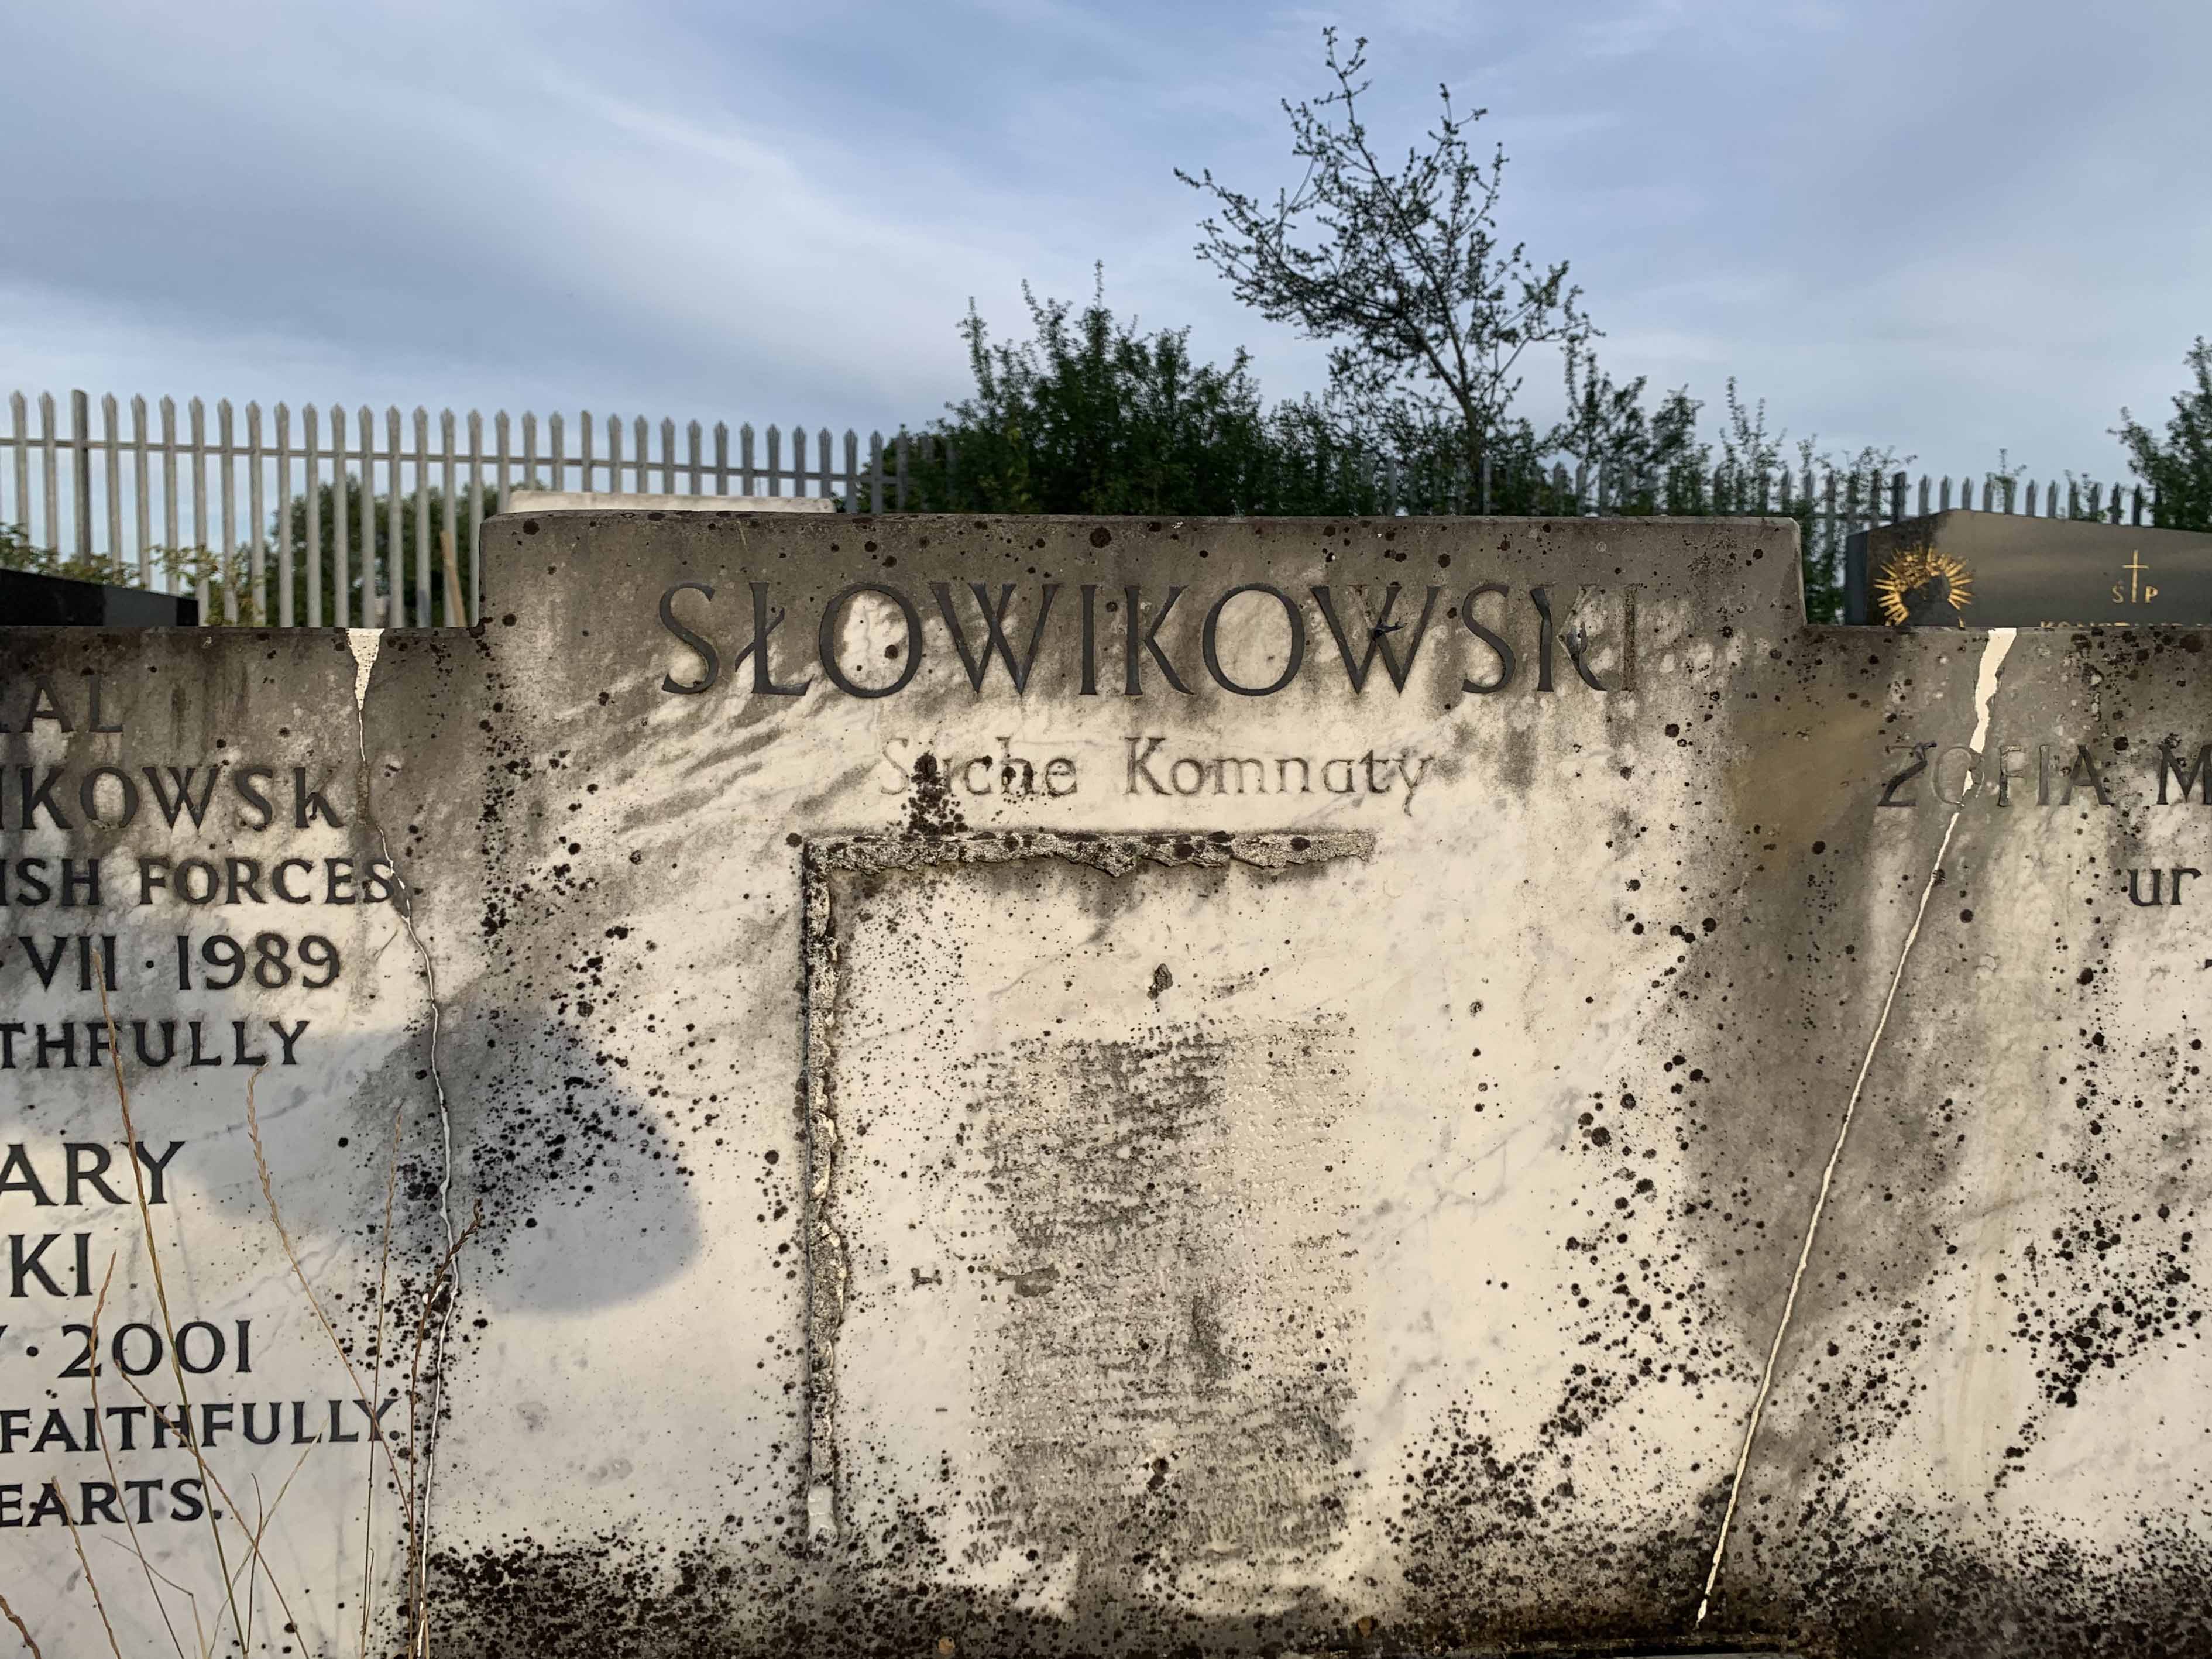 Tombstone of the Słowikowski family